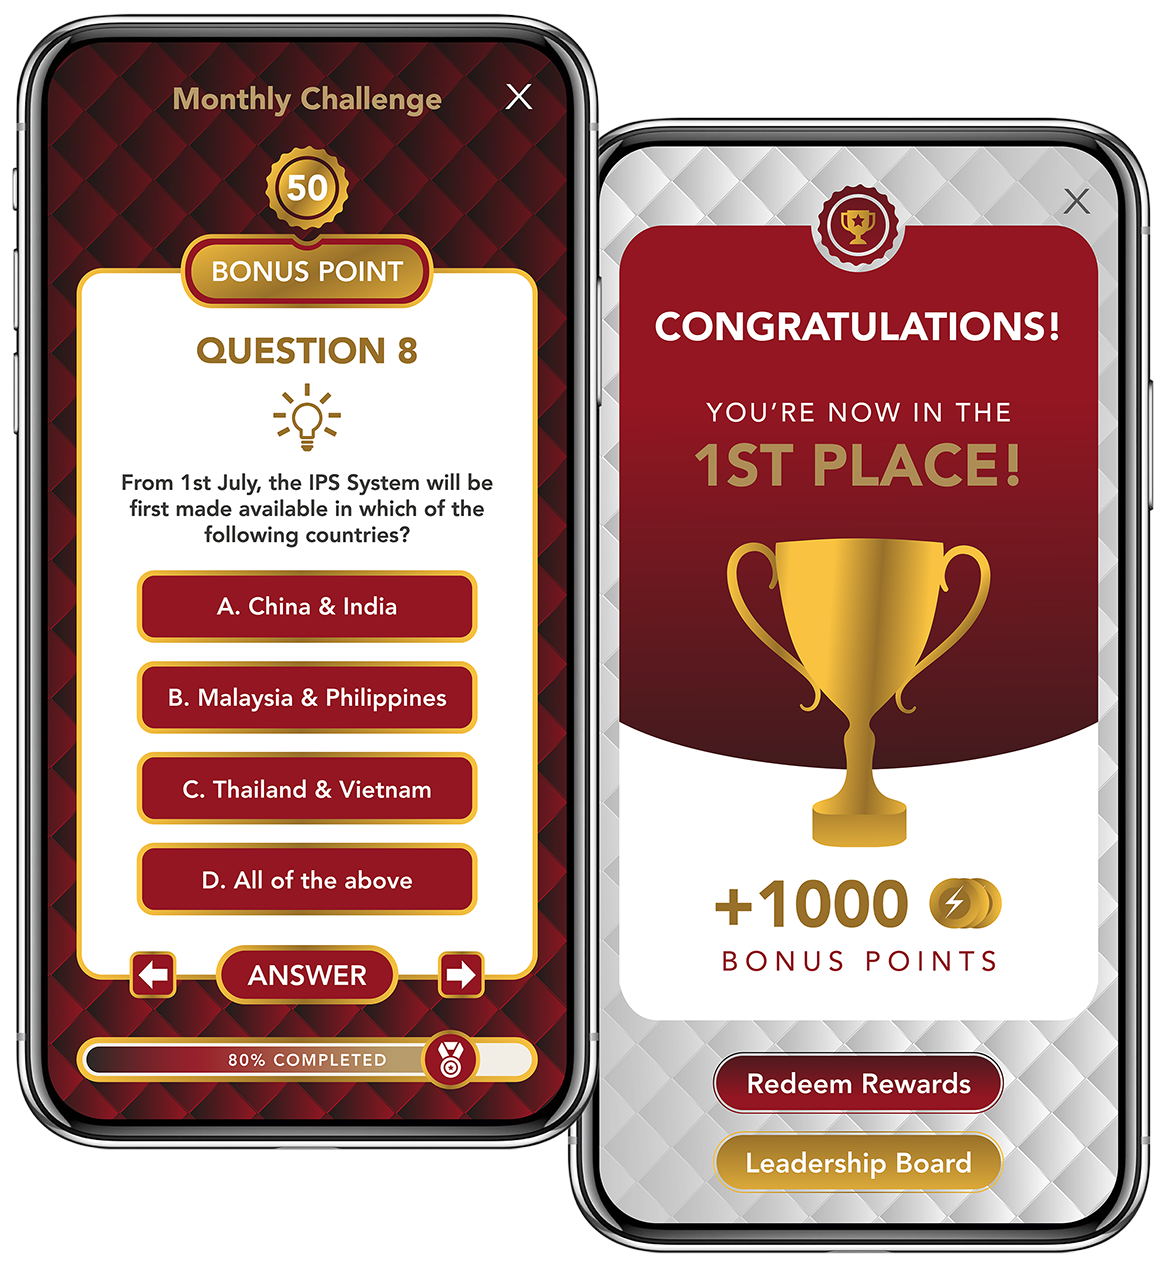 Gamification through online challenges, winner announcement and leadership board